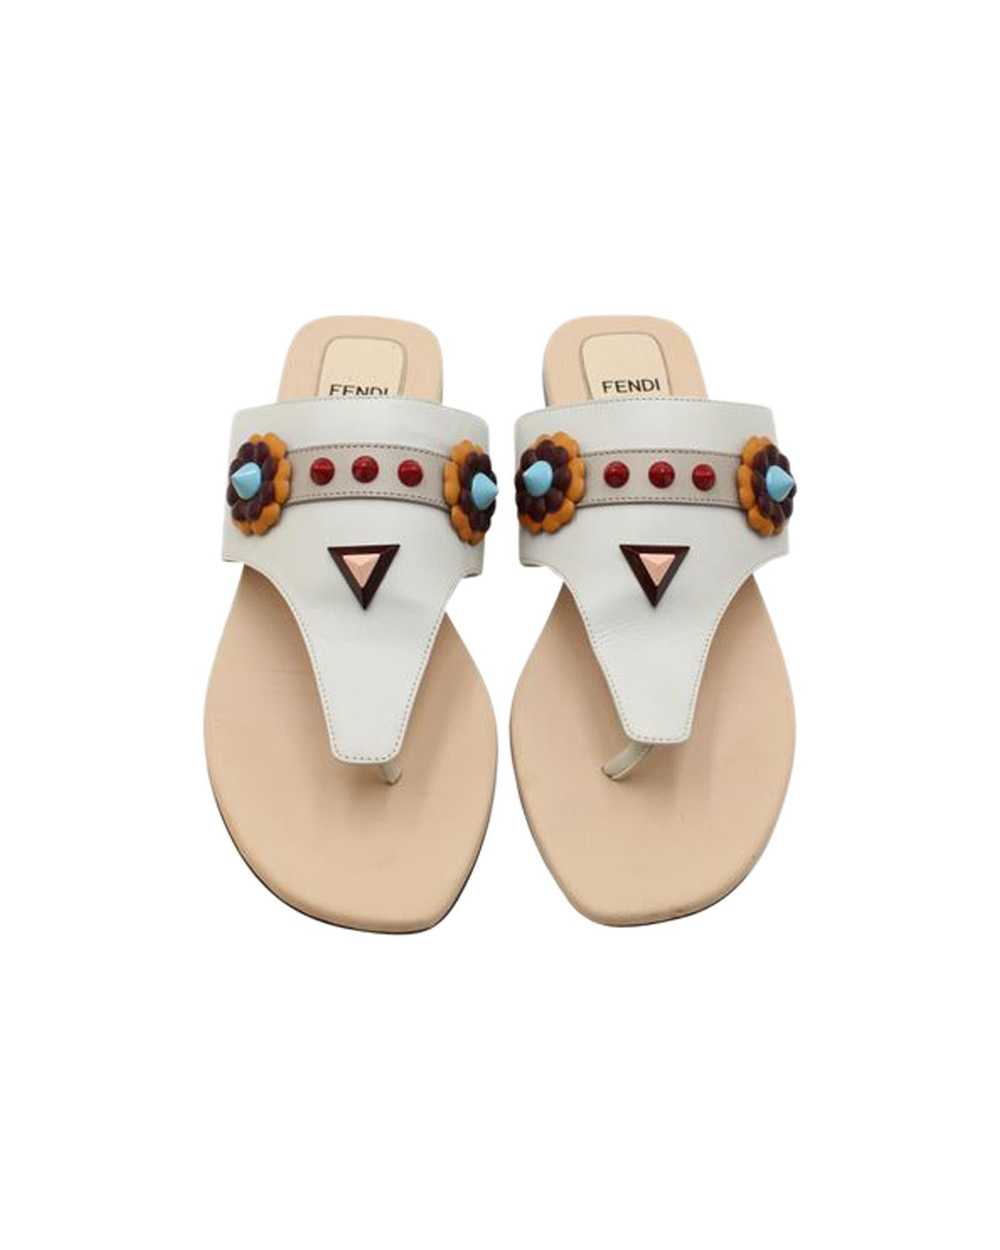 Fendi Leather Studded Thong Sandals from Italy - image 3